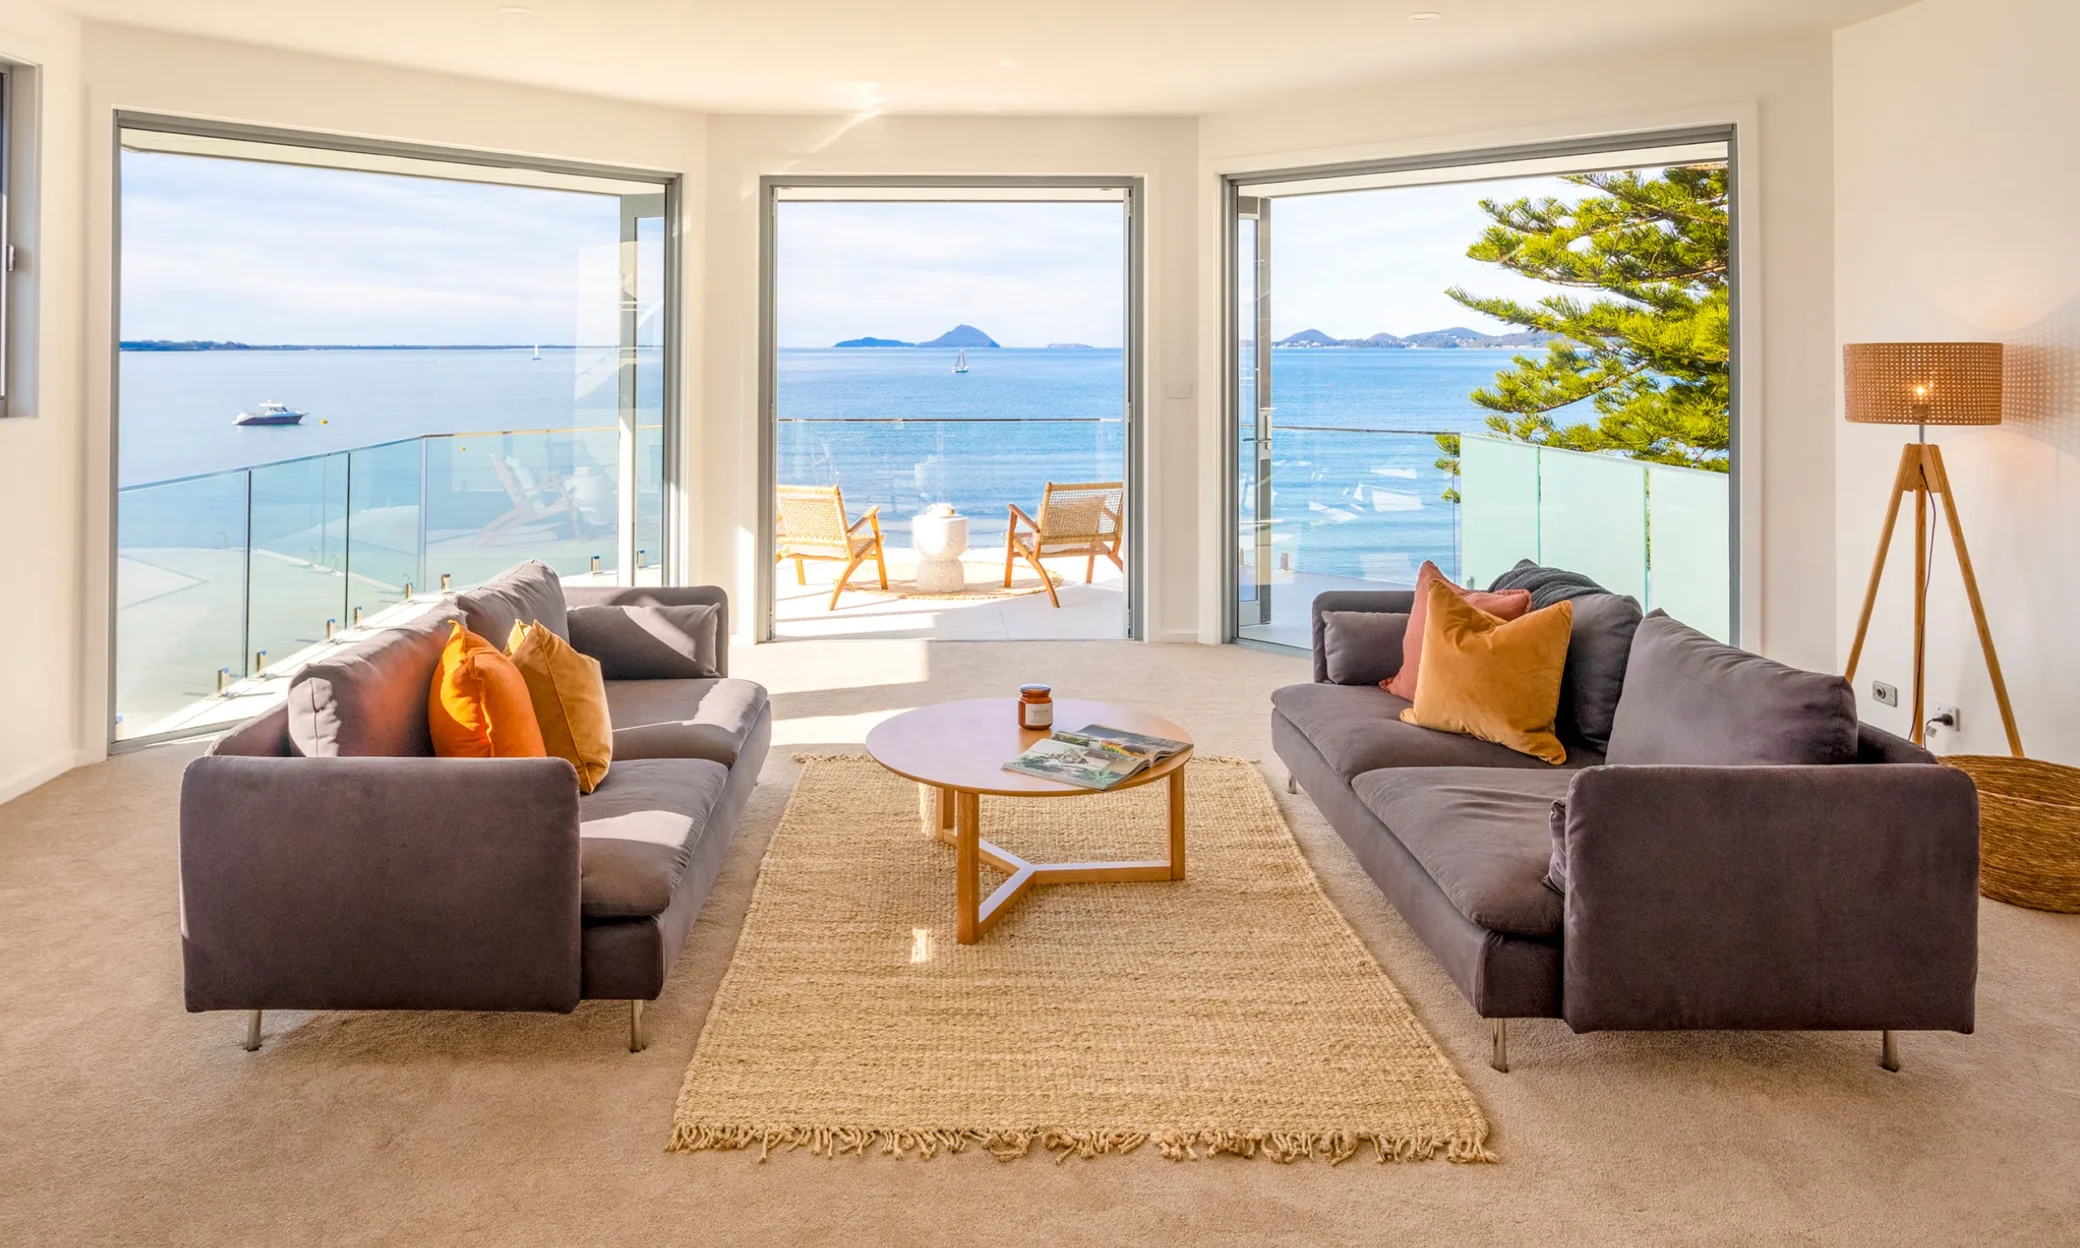 A bright, modern living room with two gray sofas facing each other over a beige rug, large glass doors open to a balcony overlooking Port Stephens with islands in the distance, and a clear blue sky.